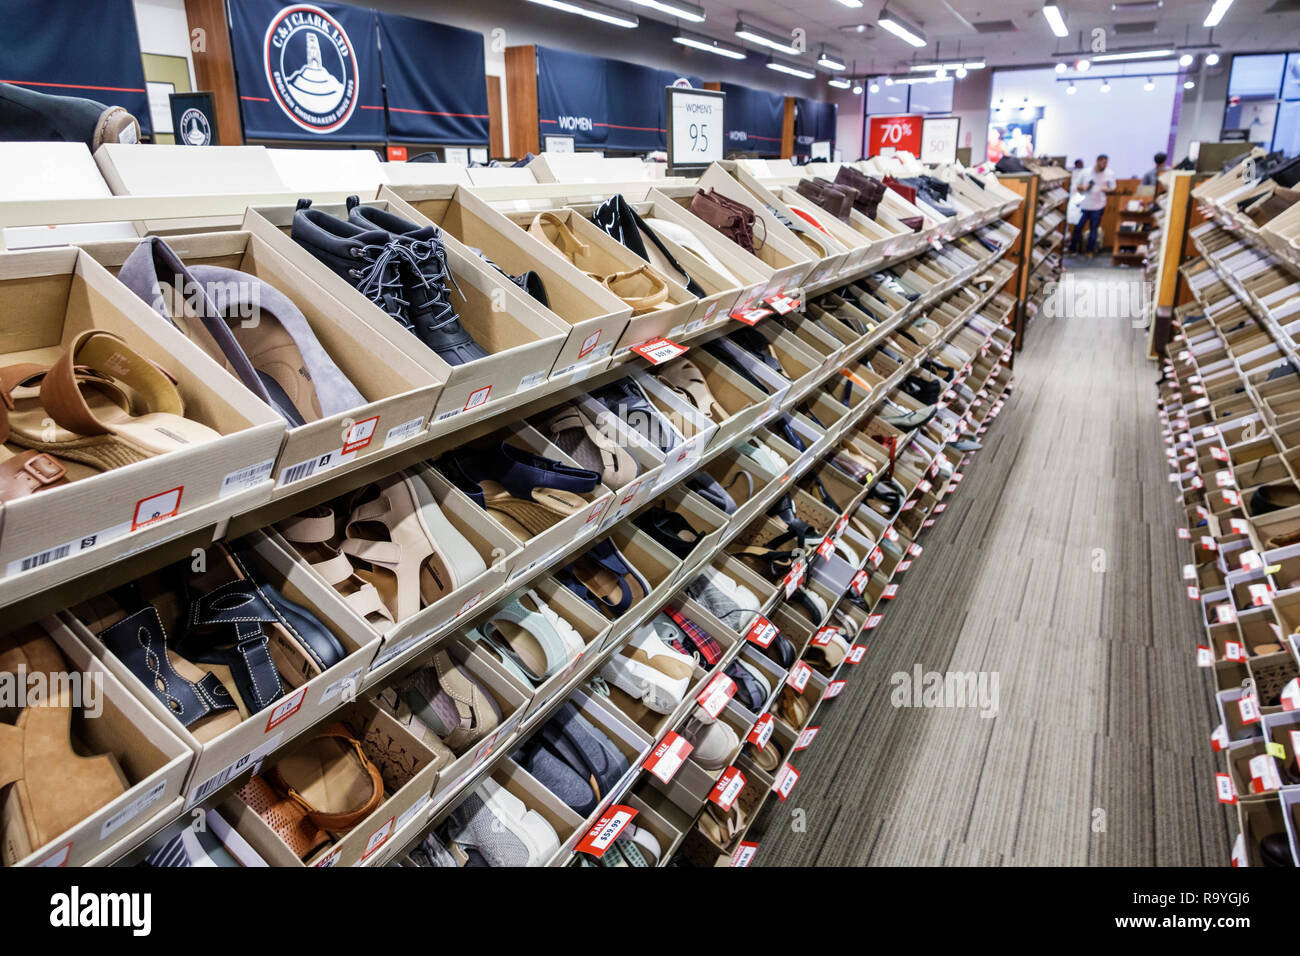 Clarks Outlet High Resolution Stock Photography and Images - Alamy